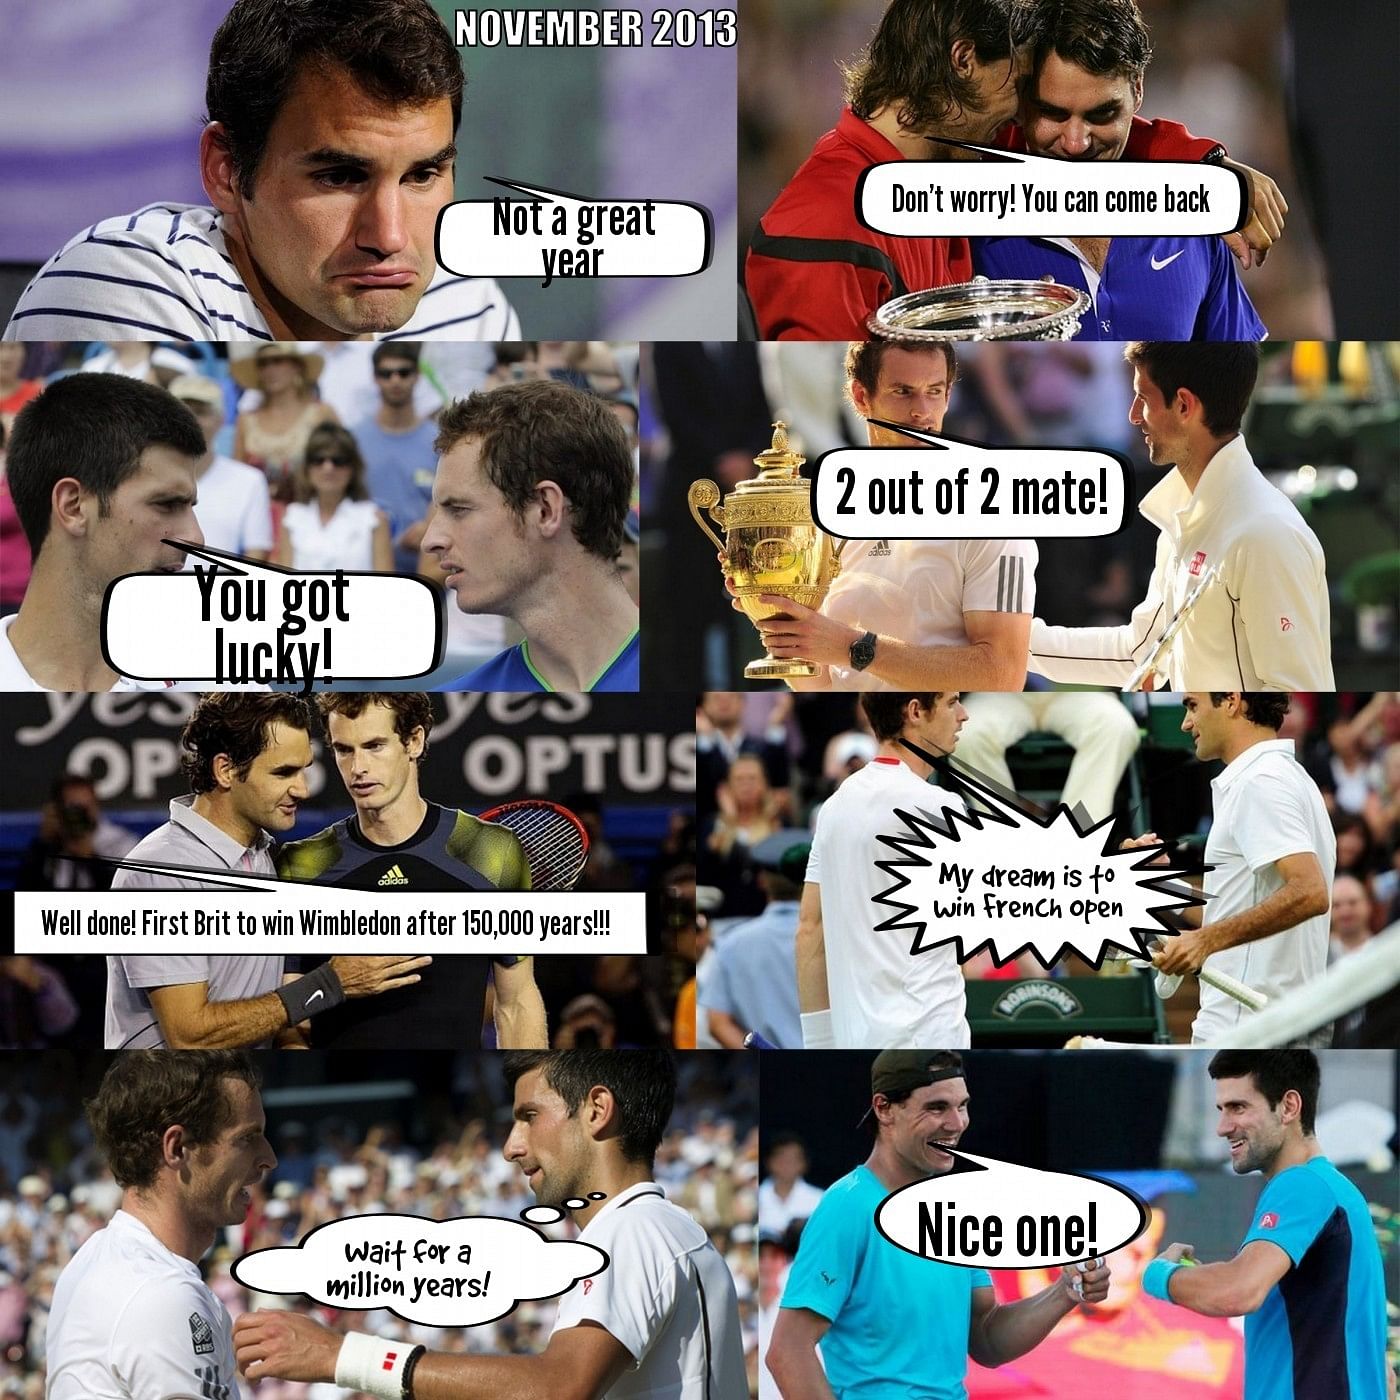 Humour: The REAL conversations between tennis players